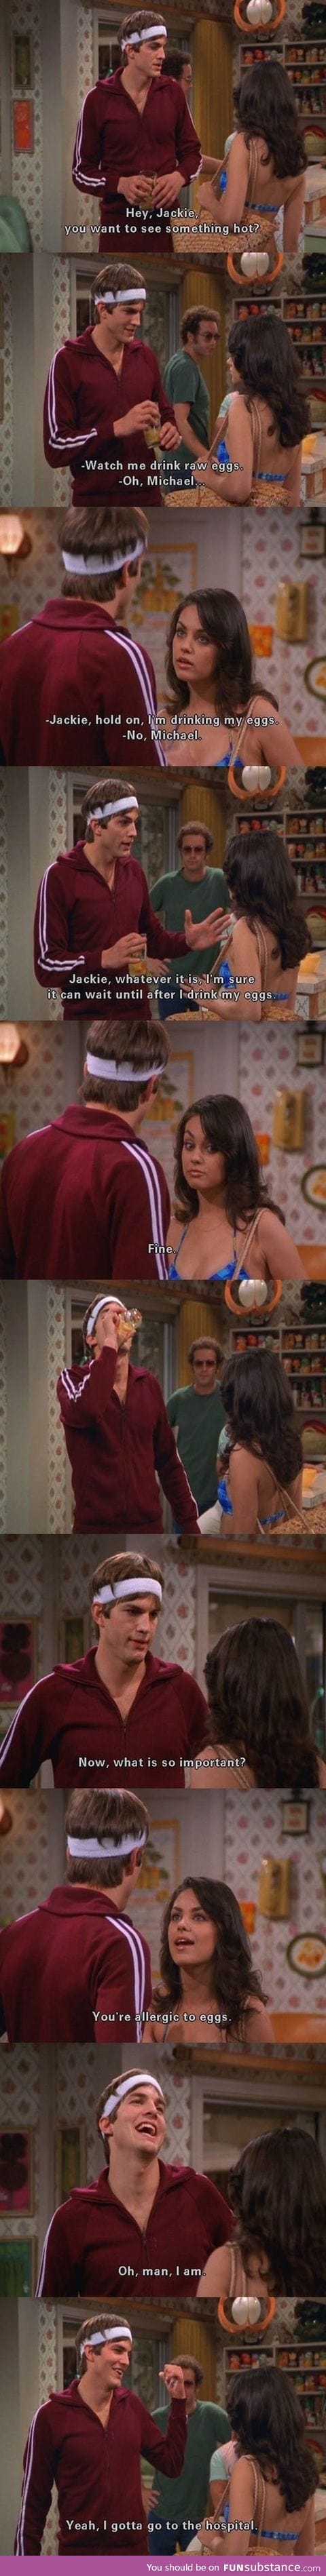 Kelso never was the brightest one